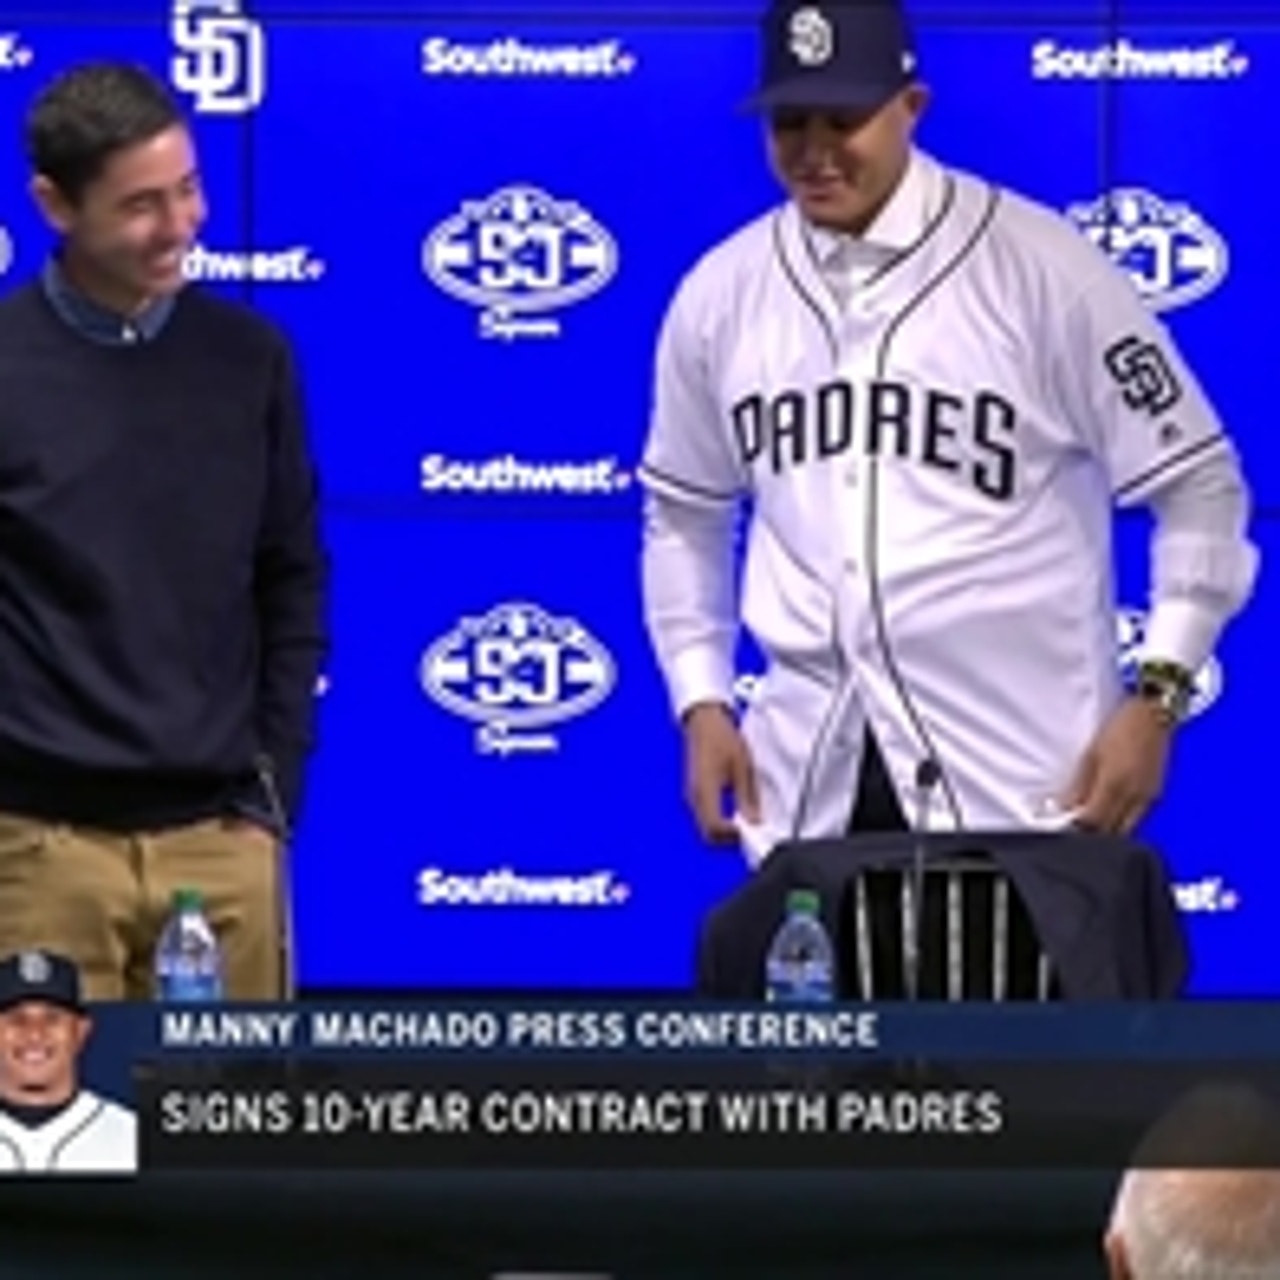 Manny Machado puts the Padres jersey on for first time!